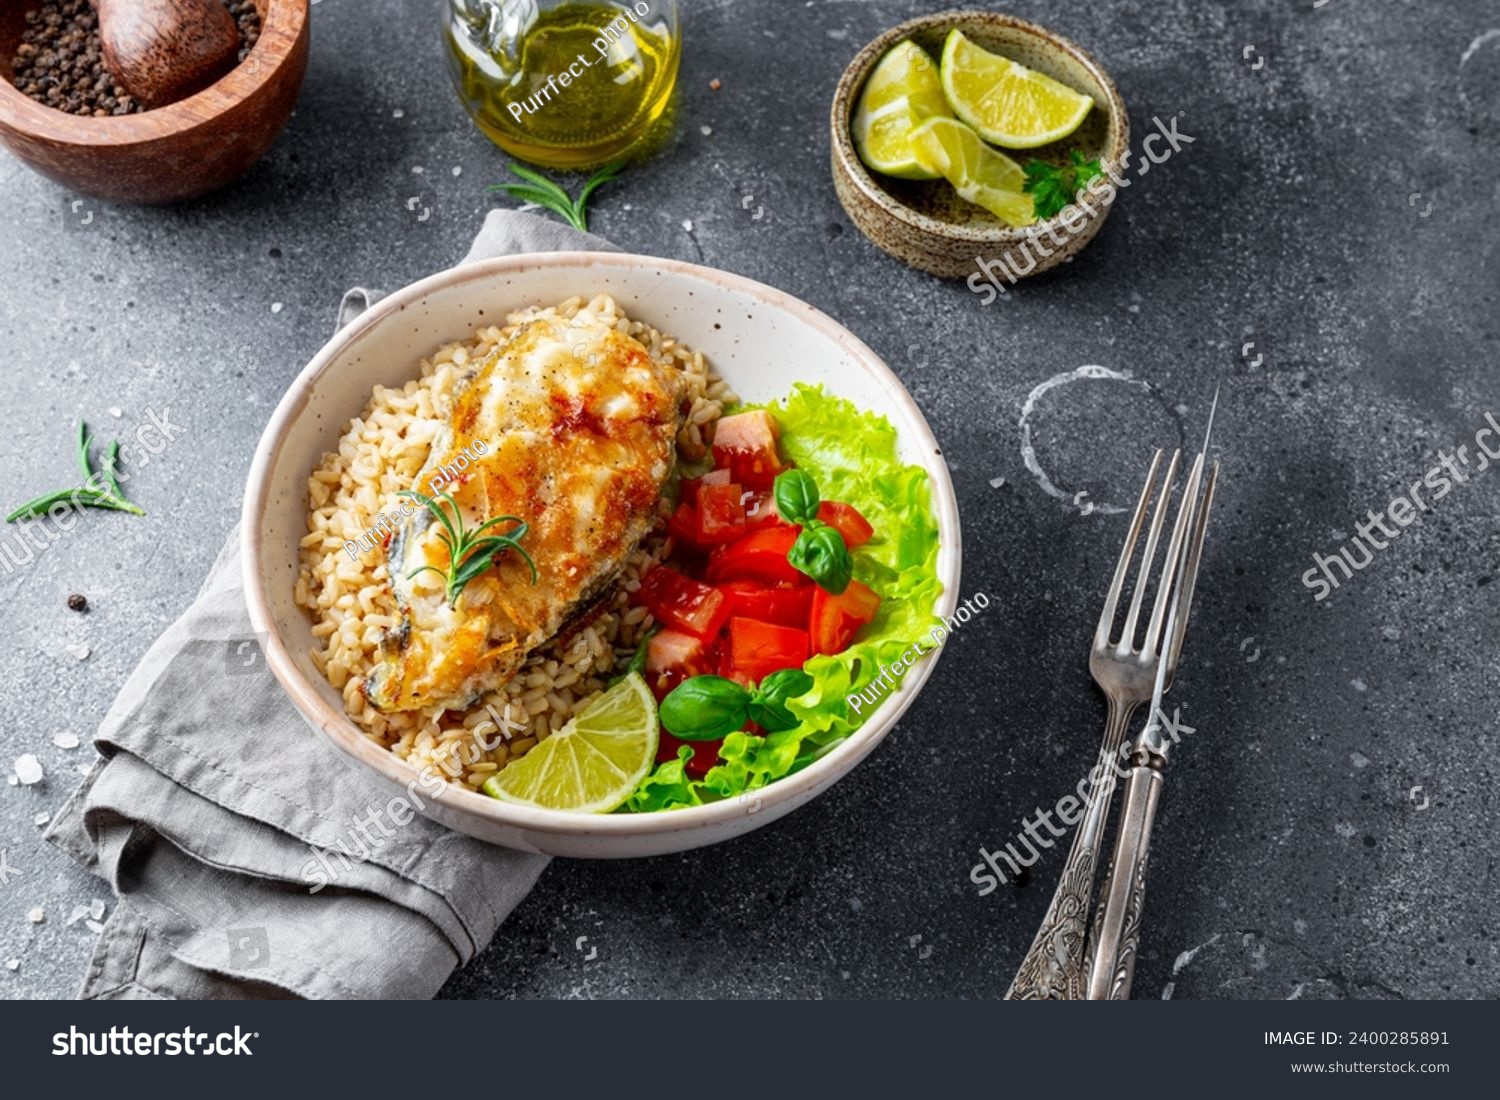 Fried catfish steak with rice and vegetable salad on a gray background. High quality photo #2400285891